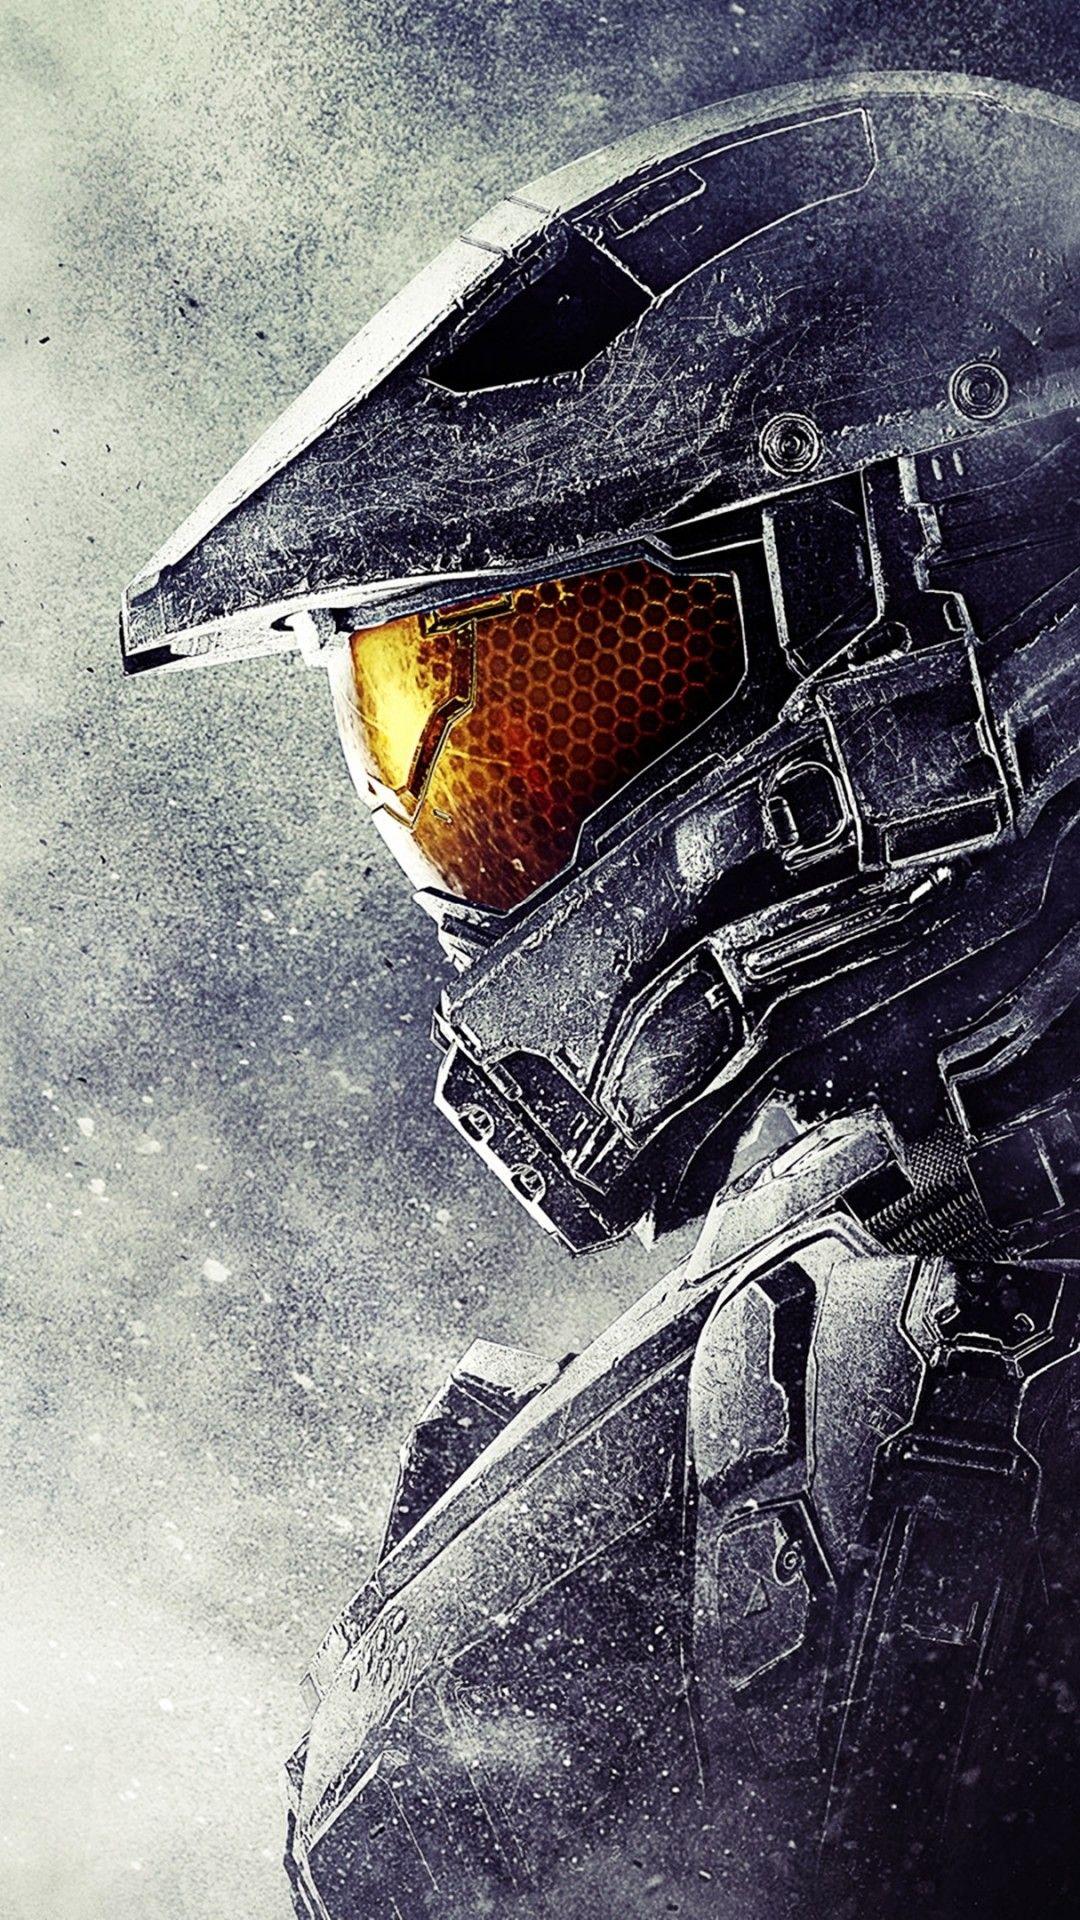 Wallpaper Halo Infinite Halo 4 Halo 3 Master Chief Multiplayer Video  Game Background  Download Free Image